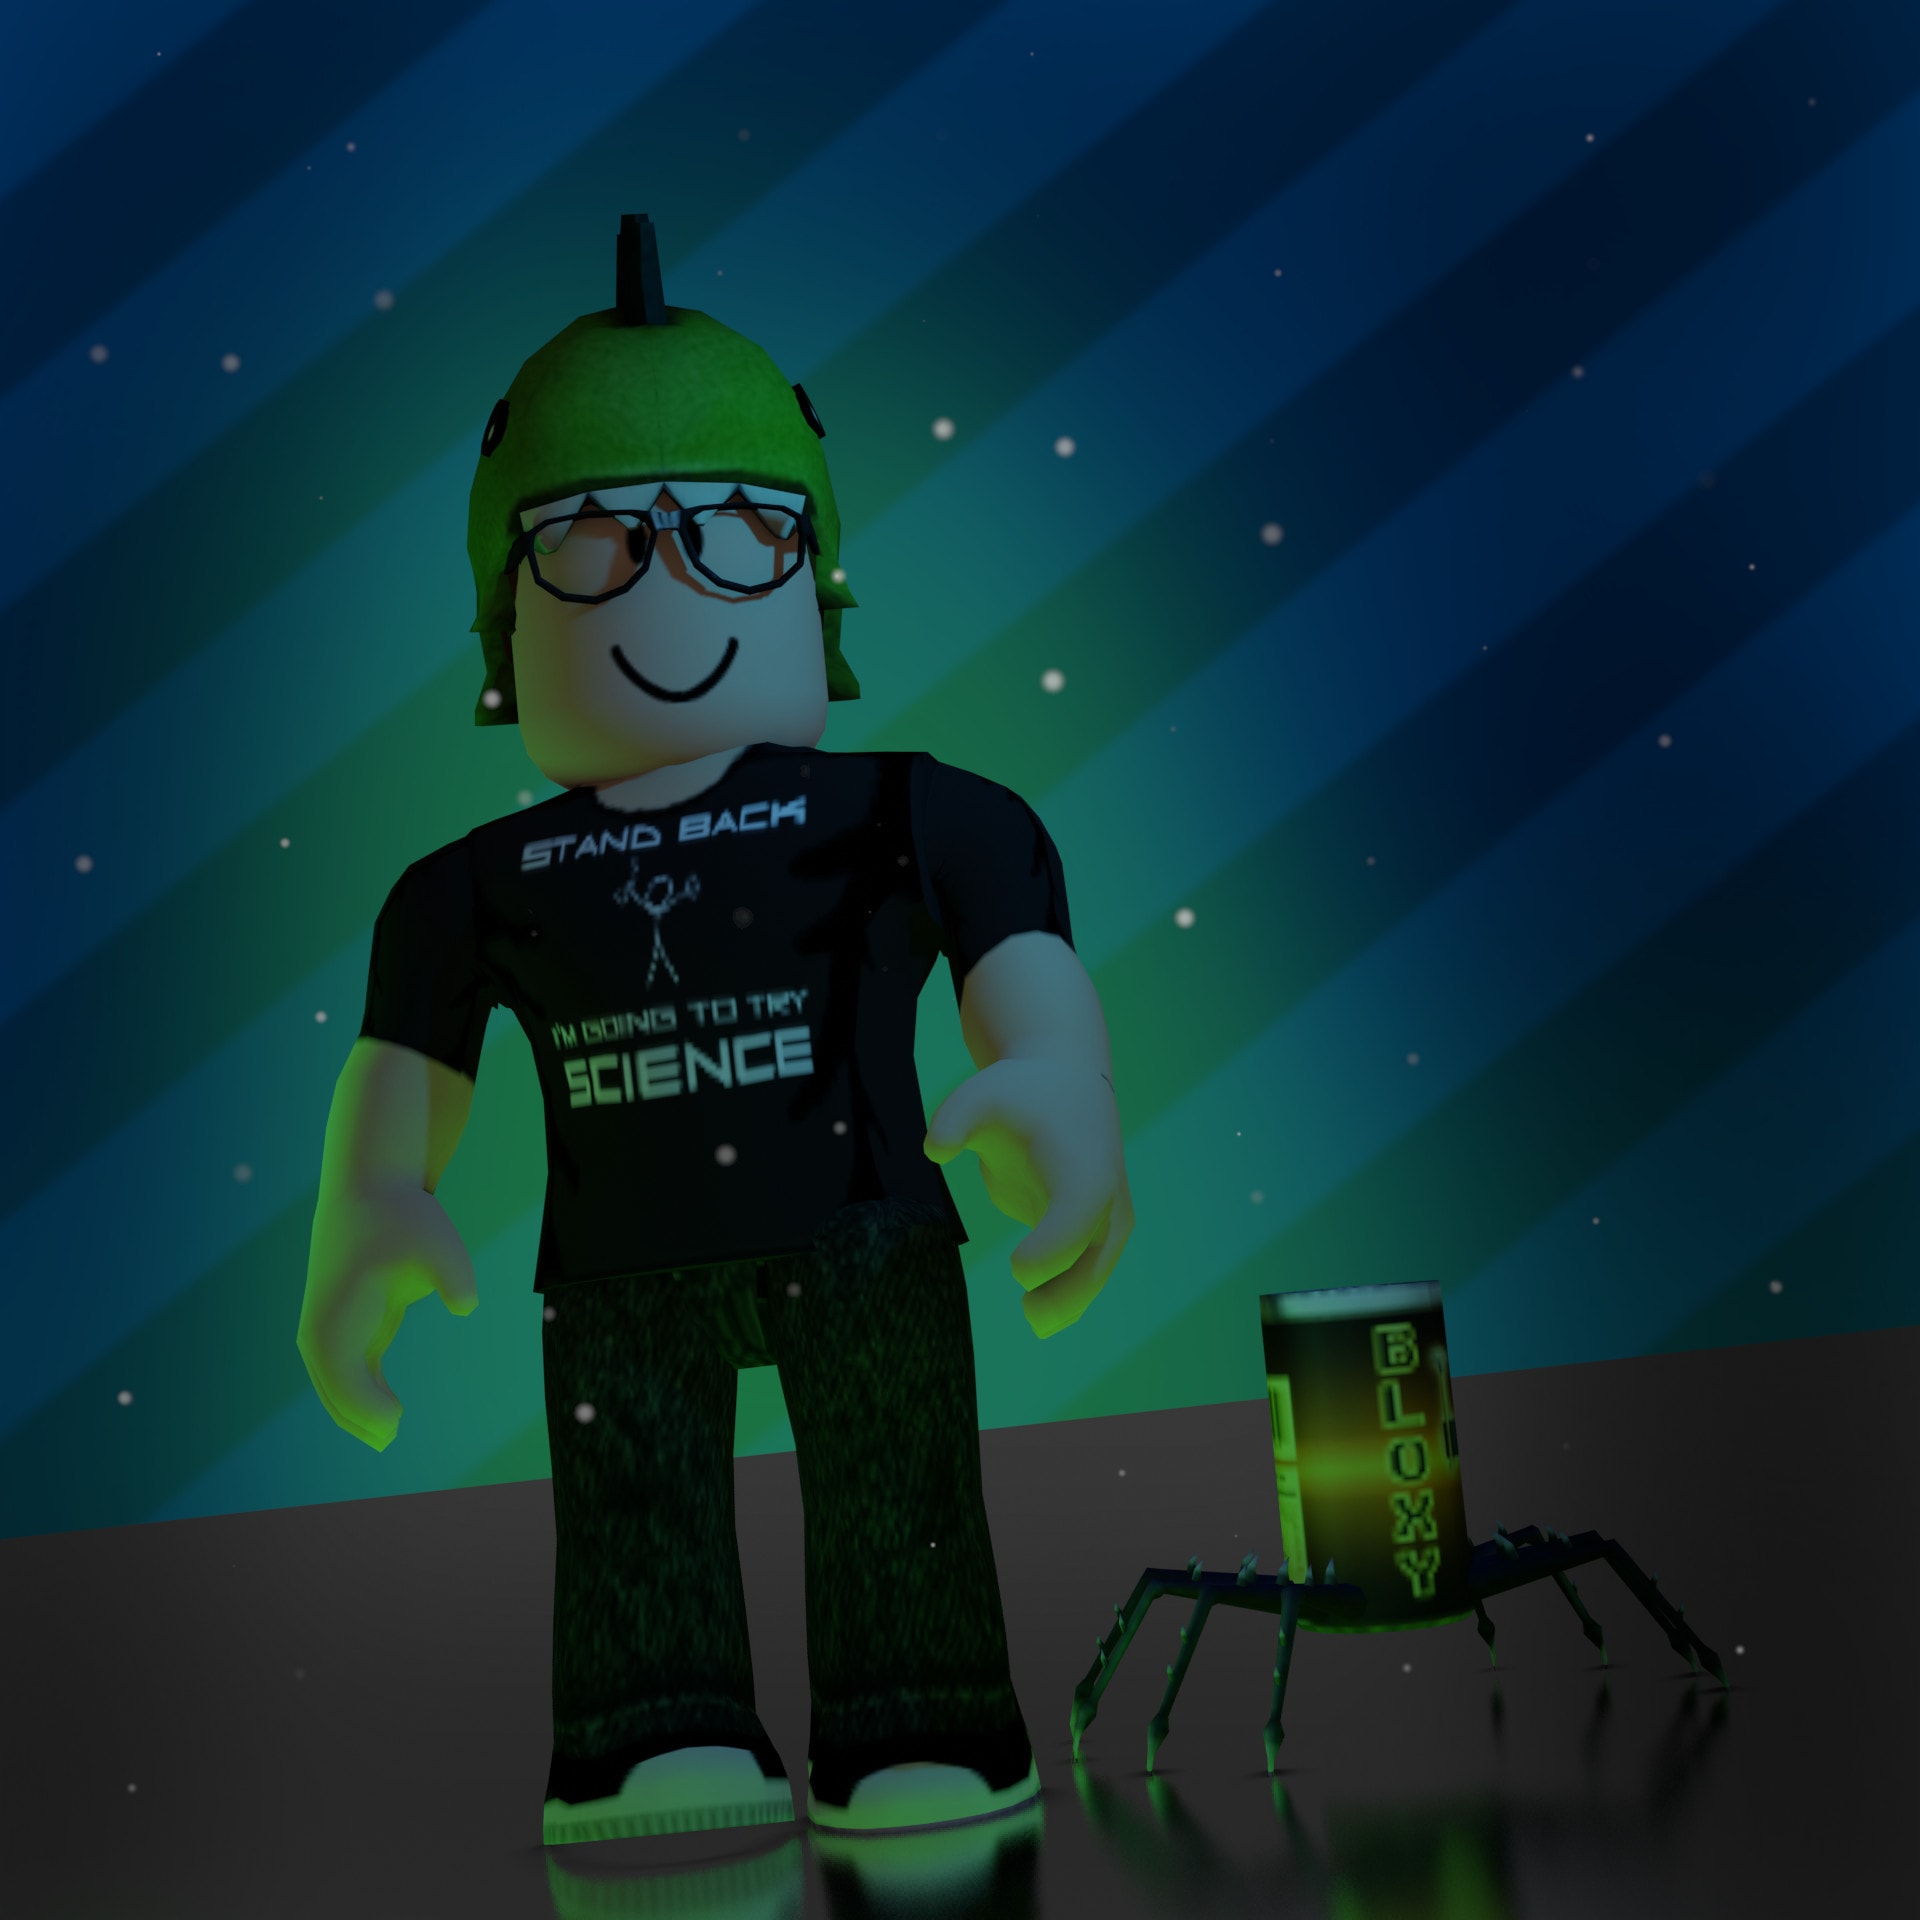 Make Your Roblox Avatar In Blender By Wizz N - how to make your roblox character blocky 2020